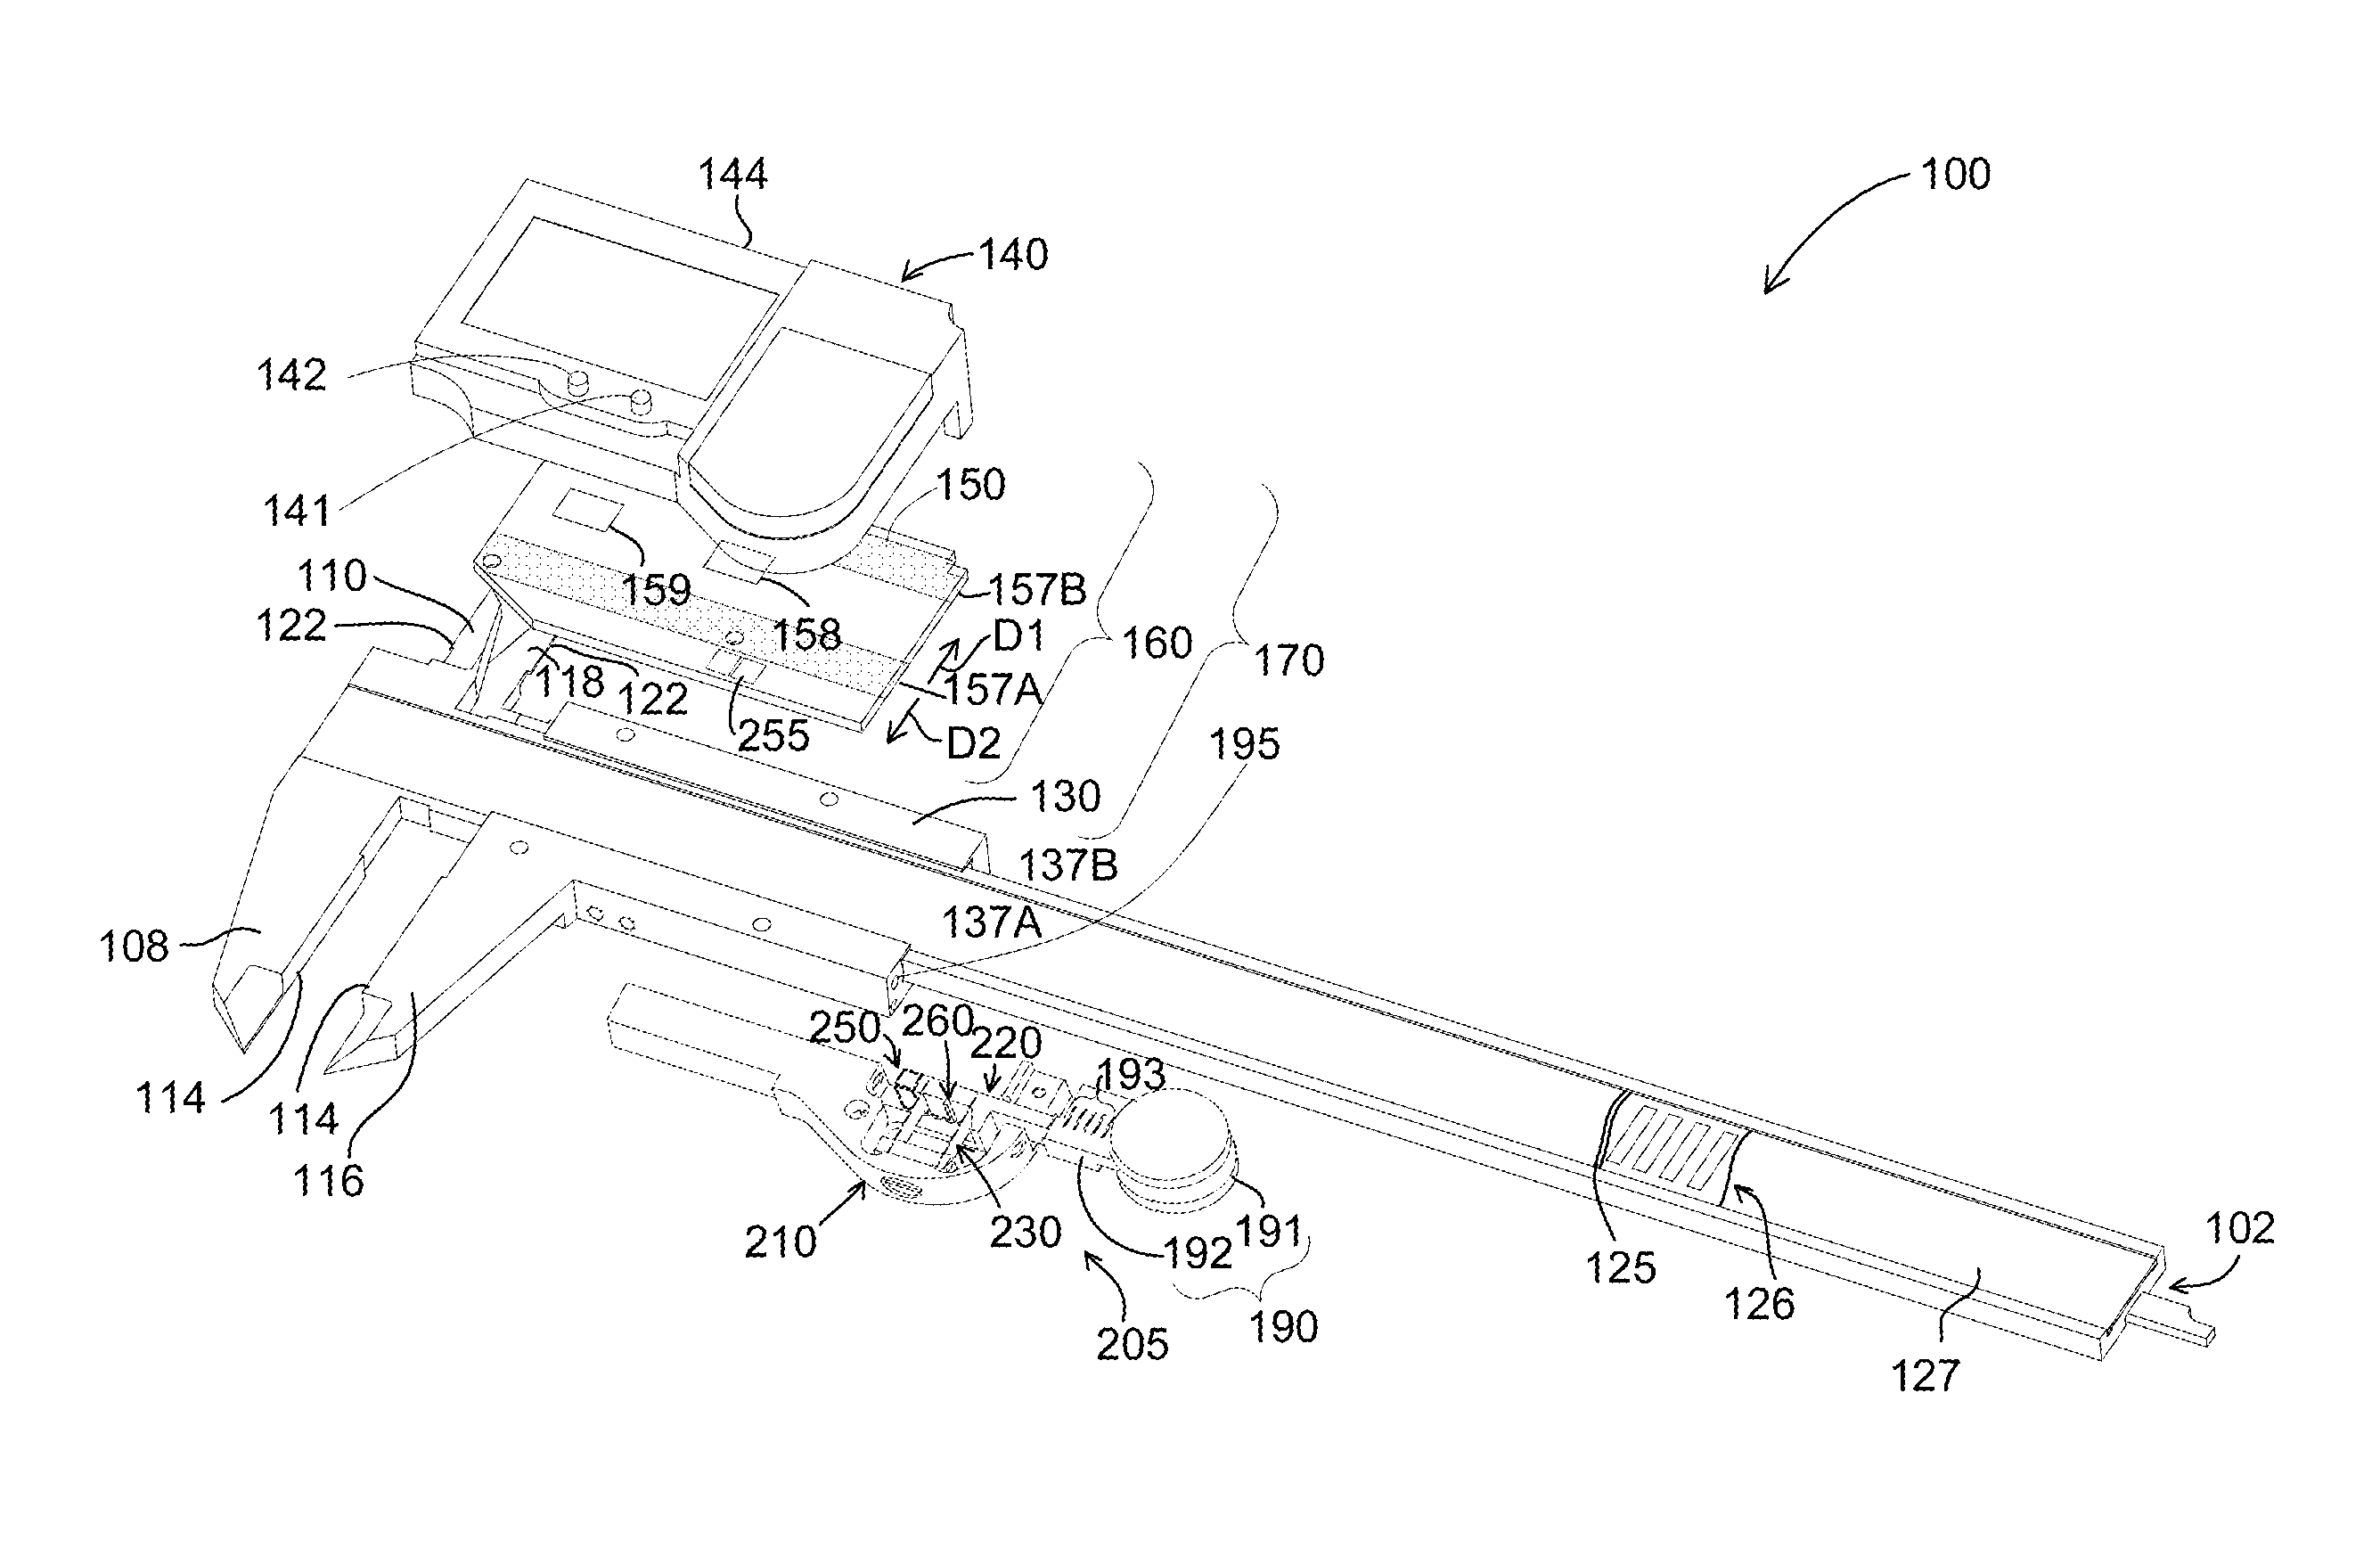 Flexible mount for coupling force actuator to caliper jaw